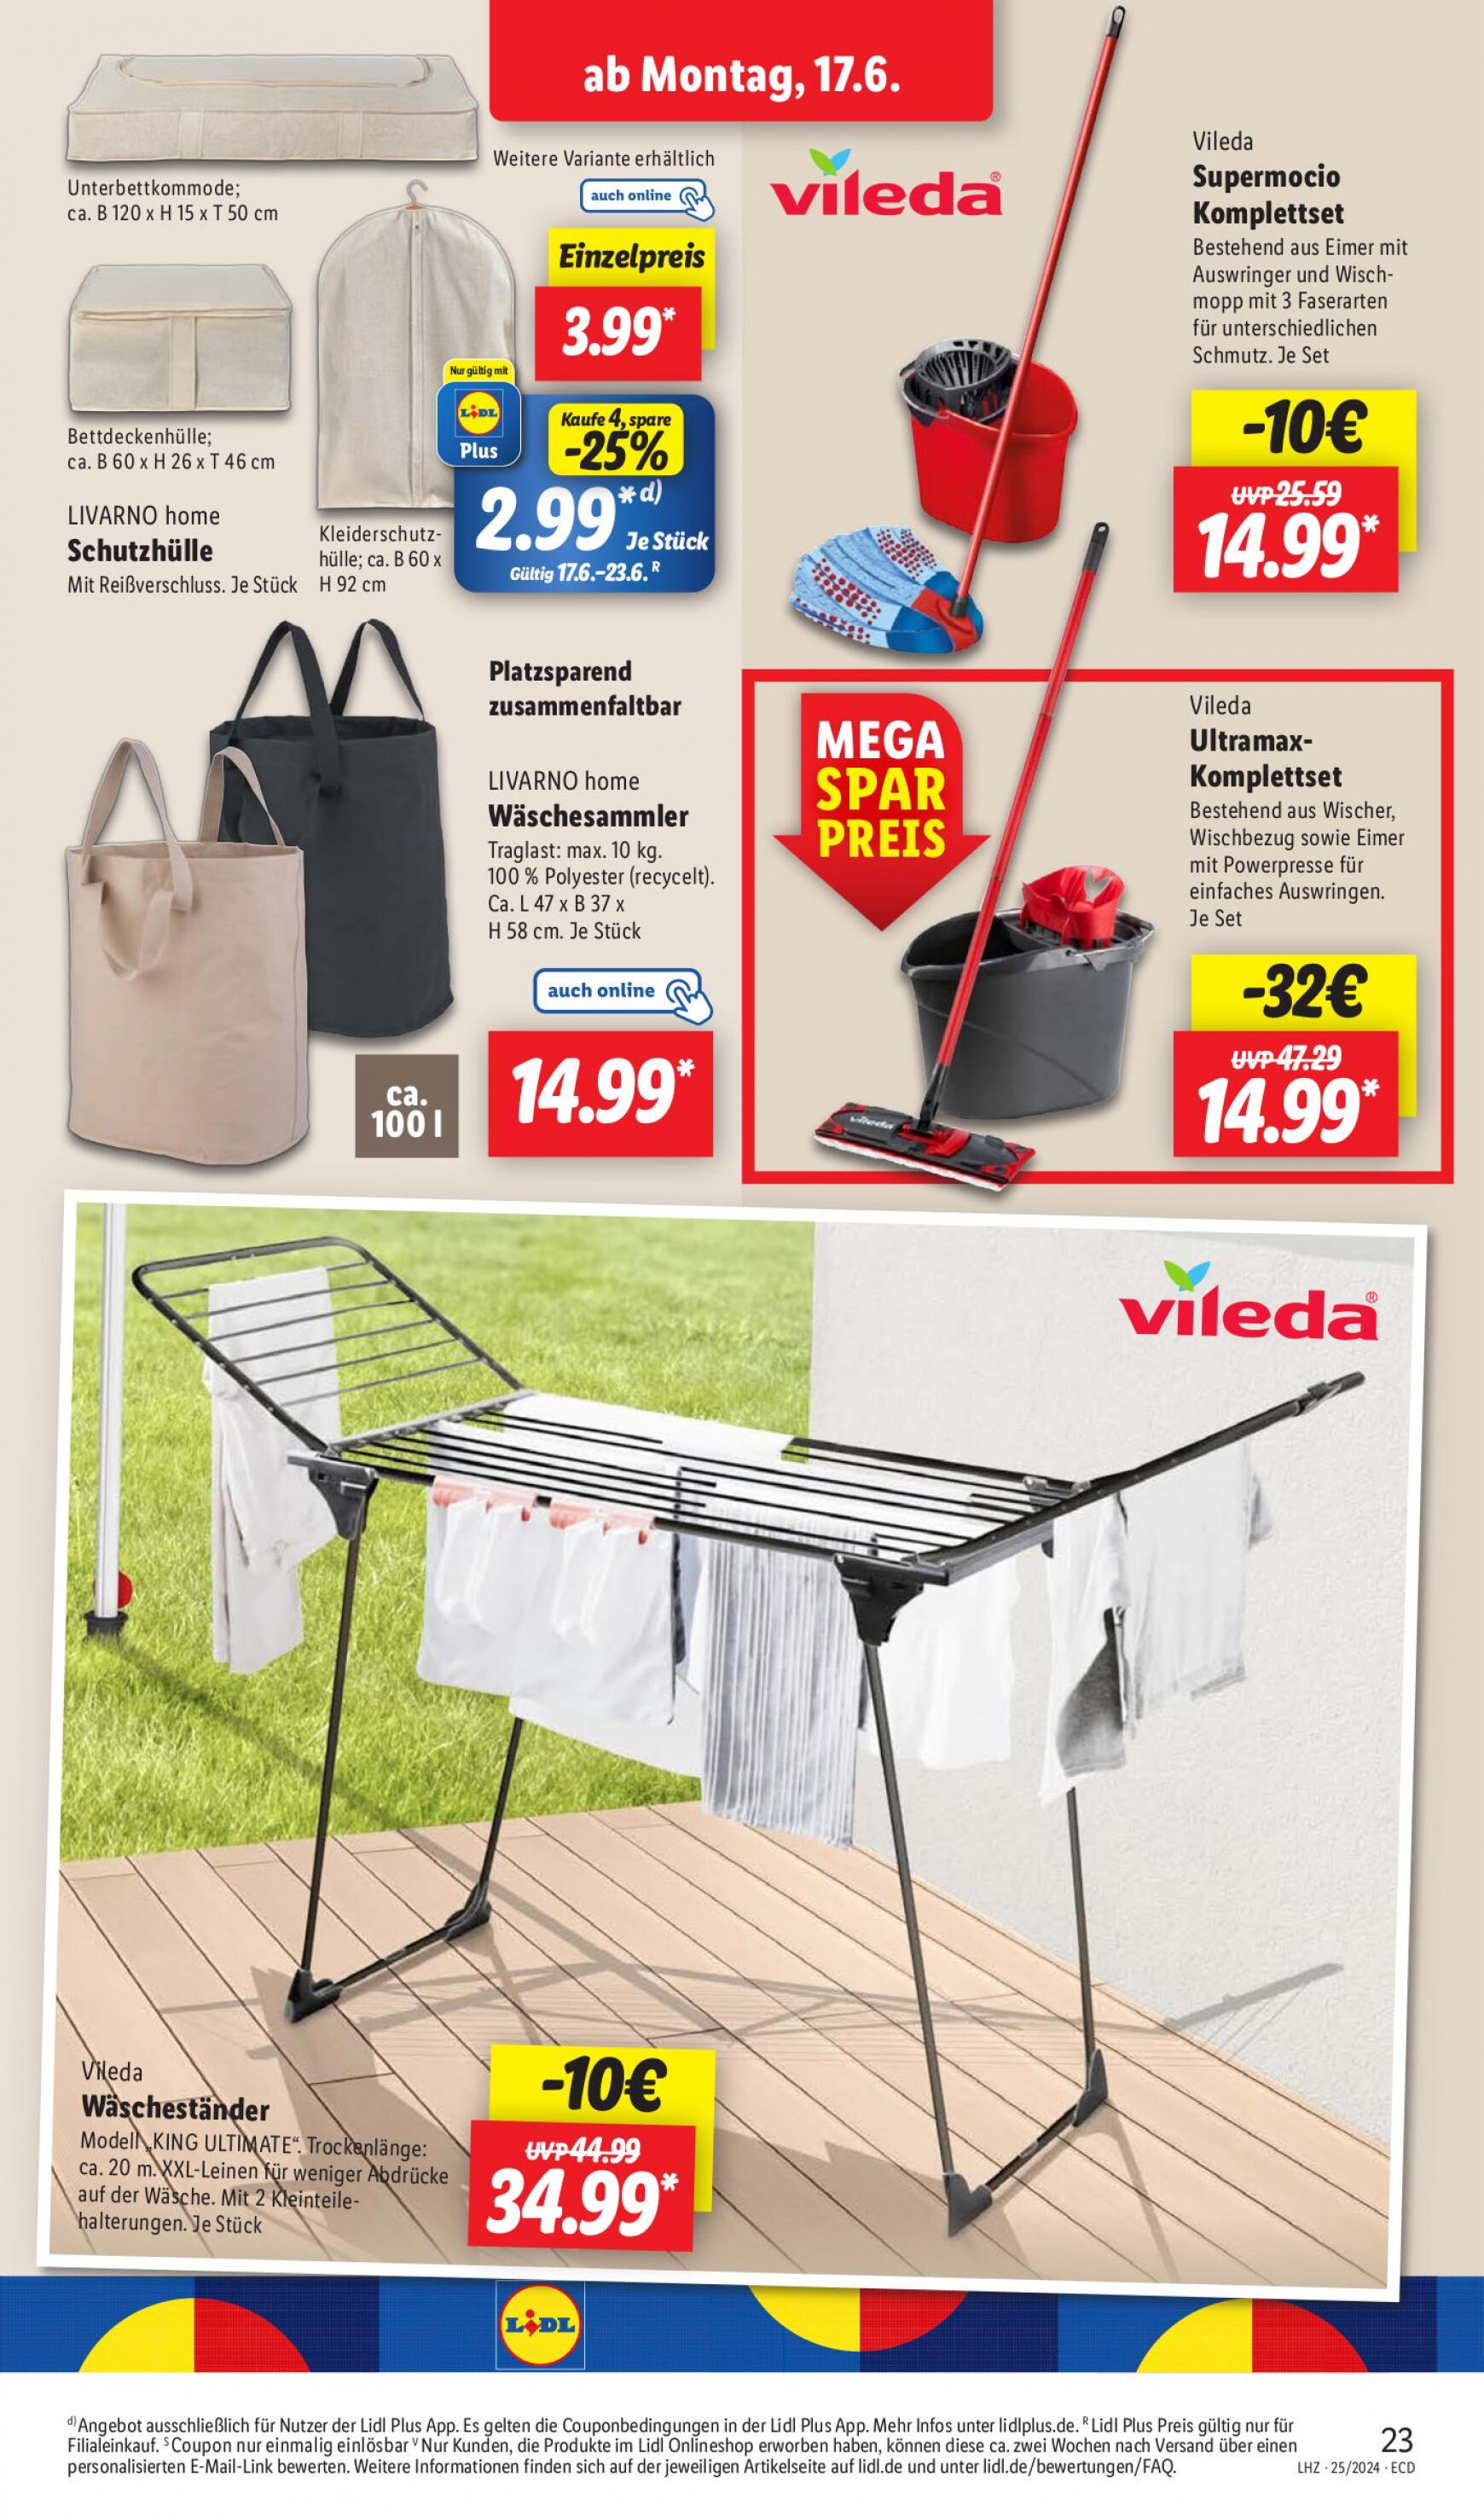 lidl - Flyer Lidl aktuell 17.06. - 22.06. - page: 27